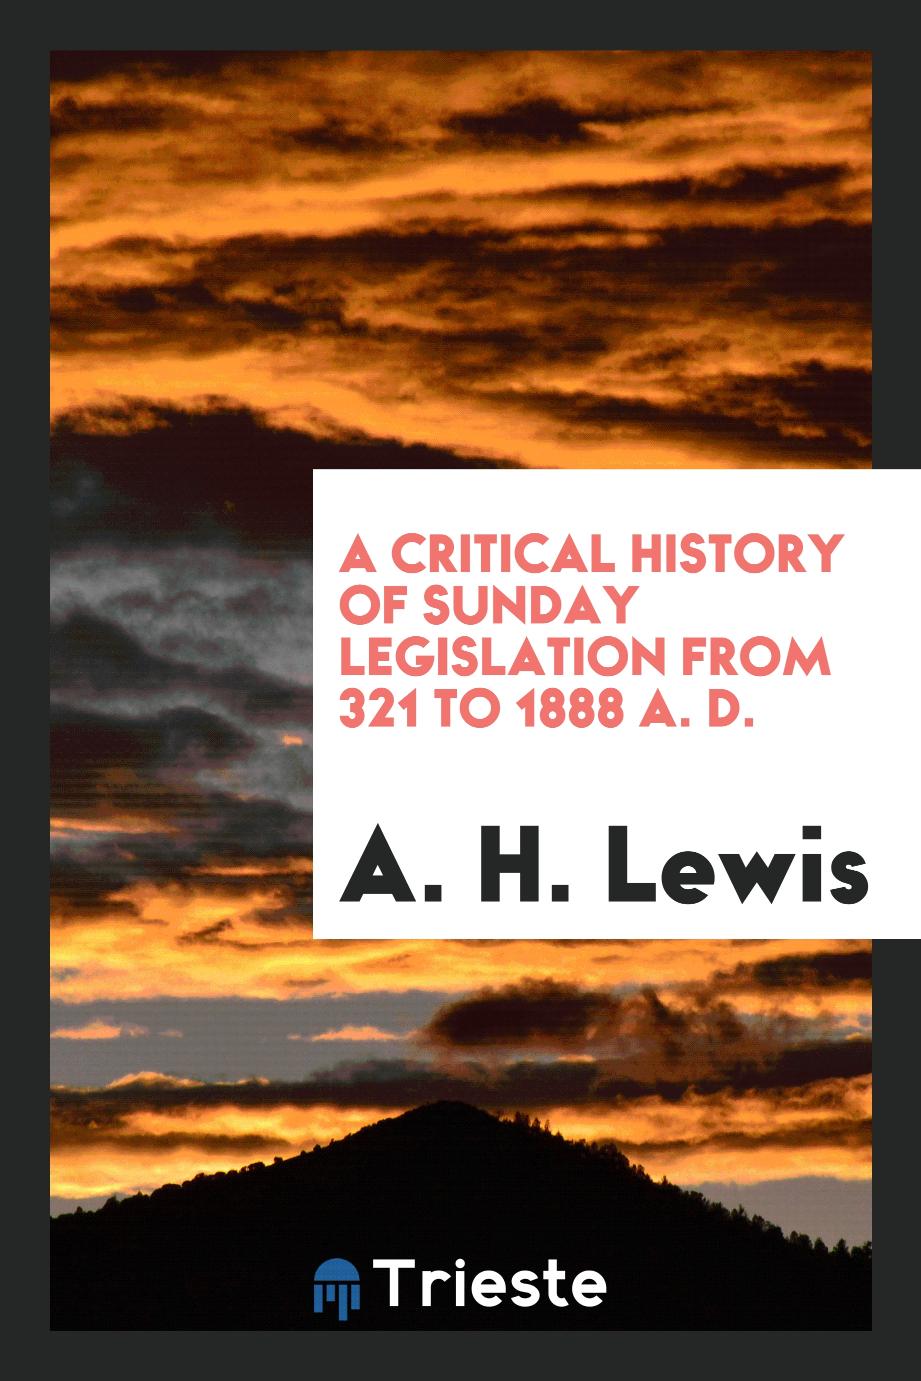 A Critical History of Sunday Legislation from 321 to 1888 A. D.